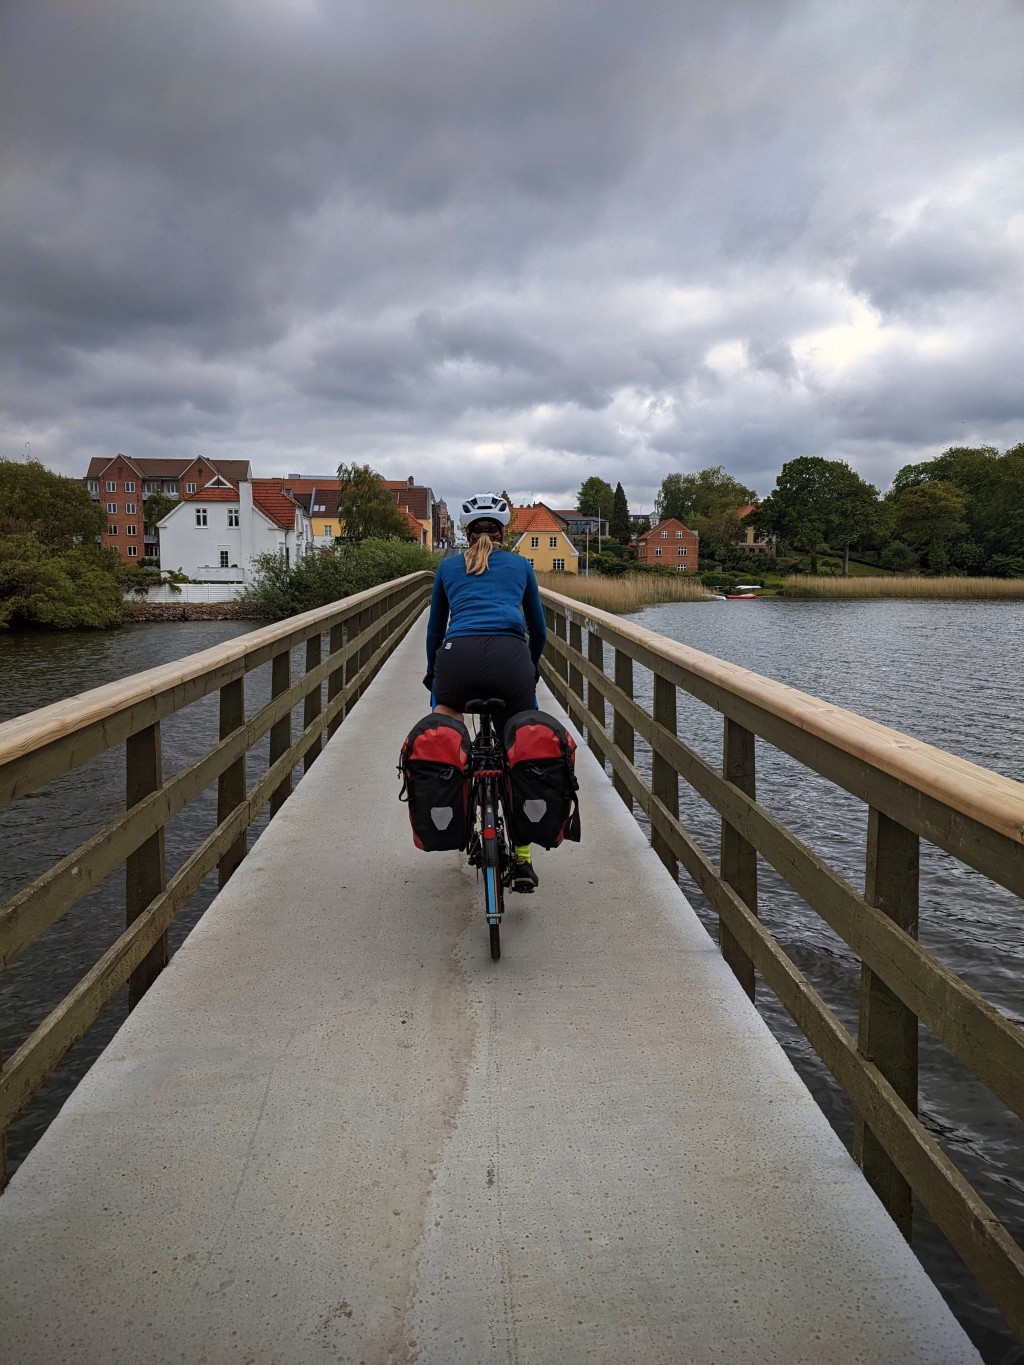 Day 19 – Tuesday 23rd May- Bølling to Aarhus